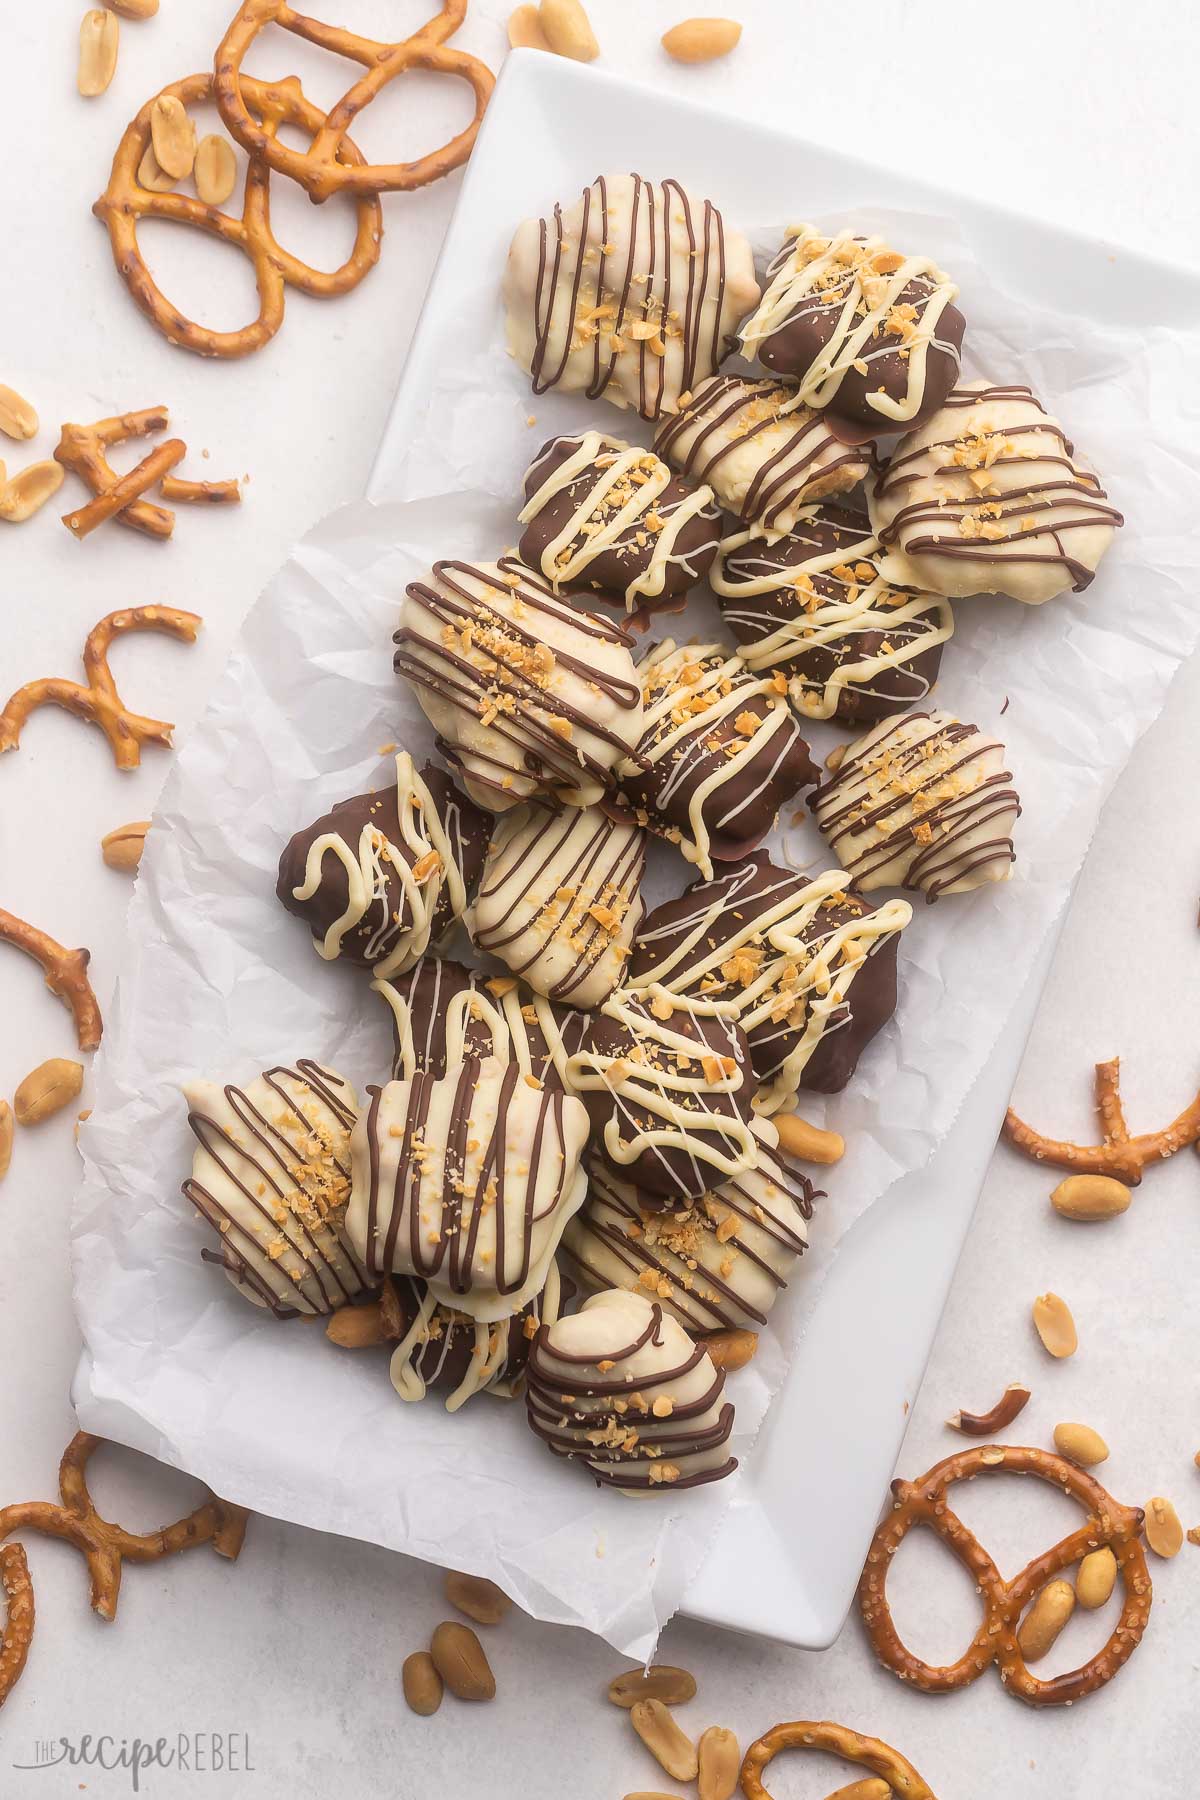 Top view of Chocolate Peanut Butter Pretzel Candies on a white plate.